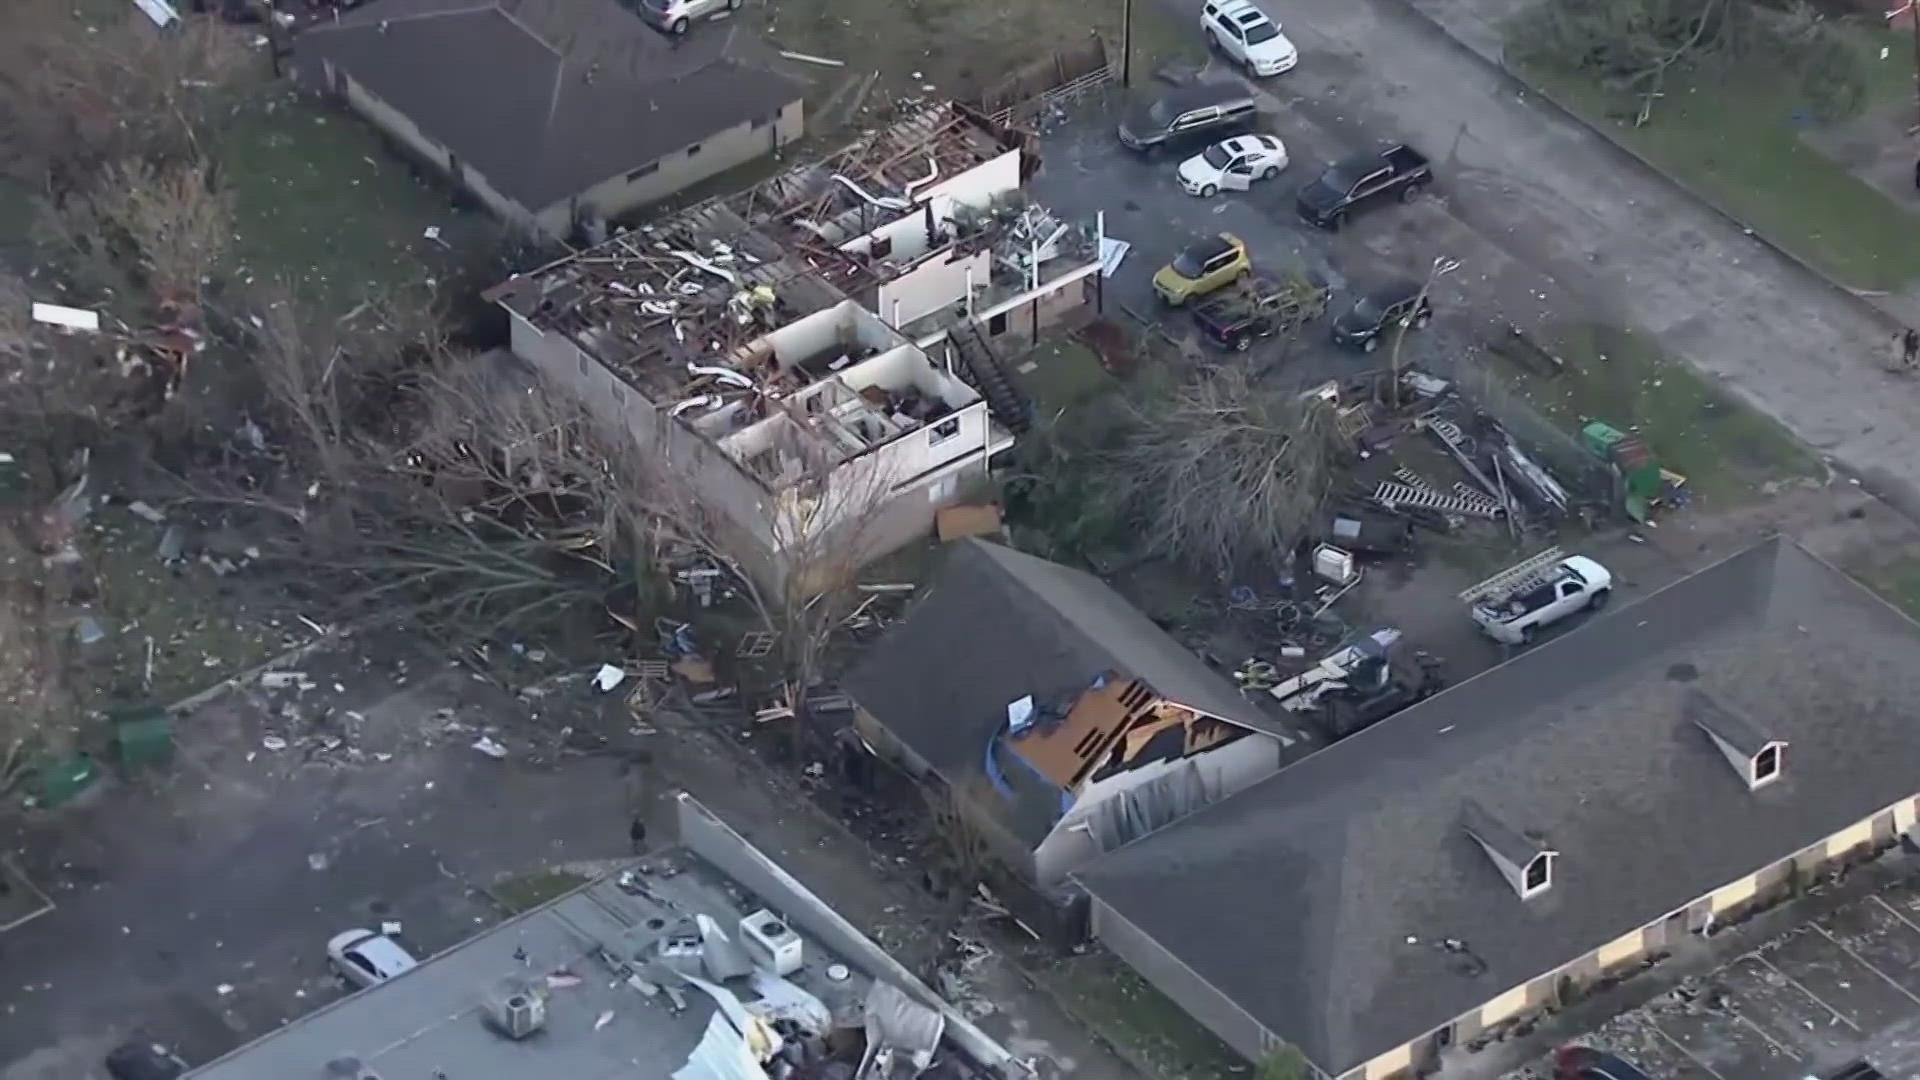 Several communities are left having to clean up following severe weather in the Houston and surrounding areas.